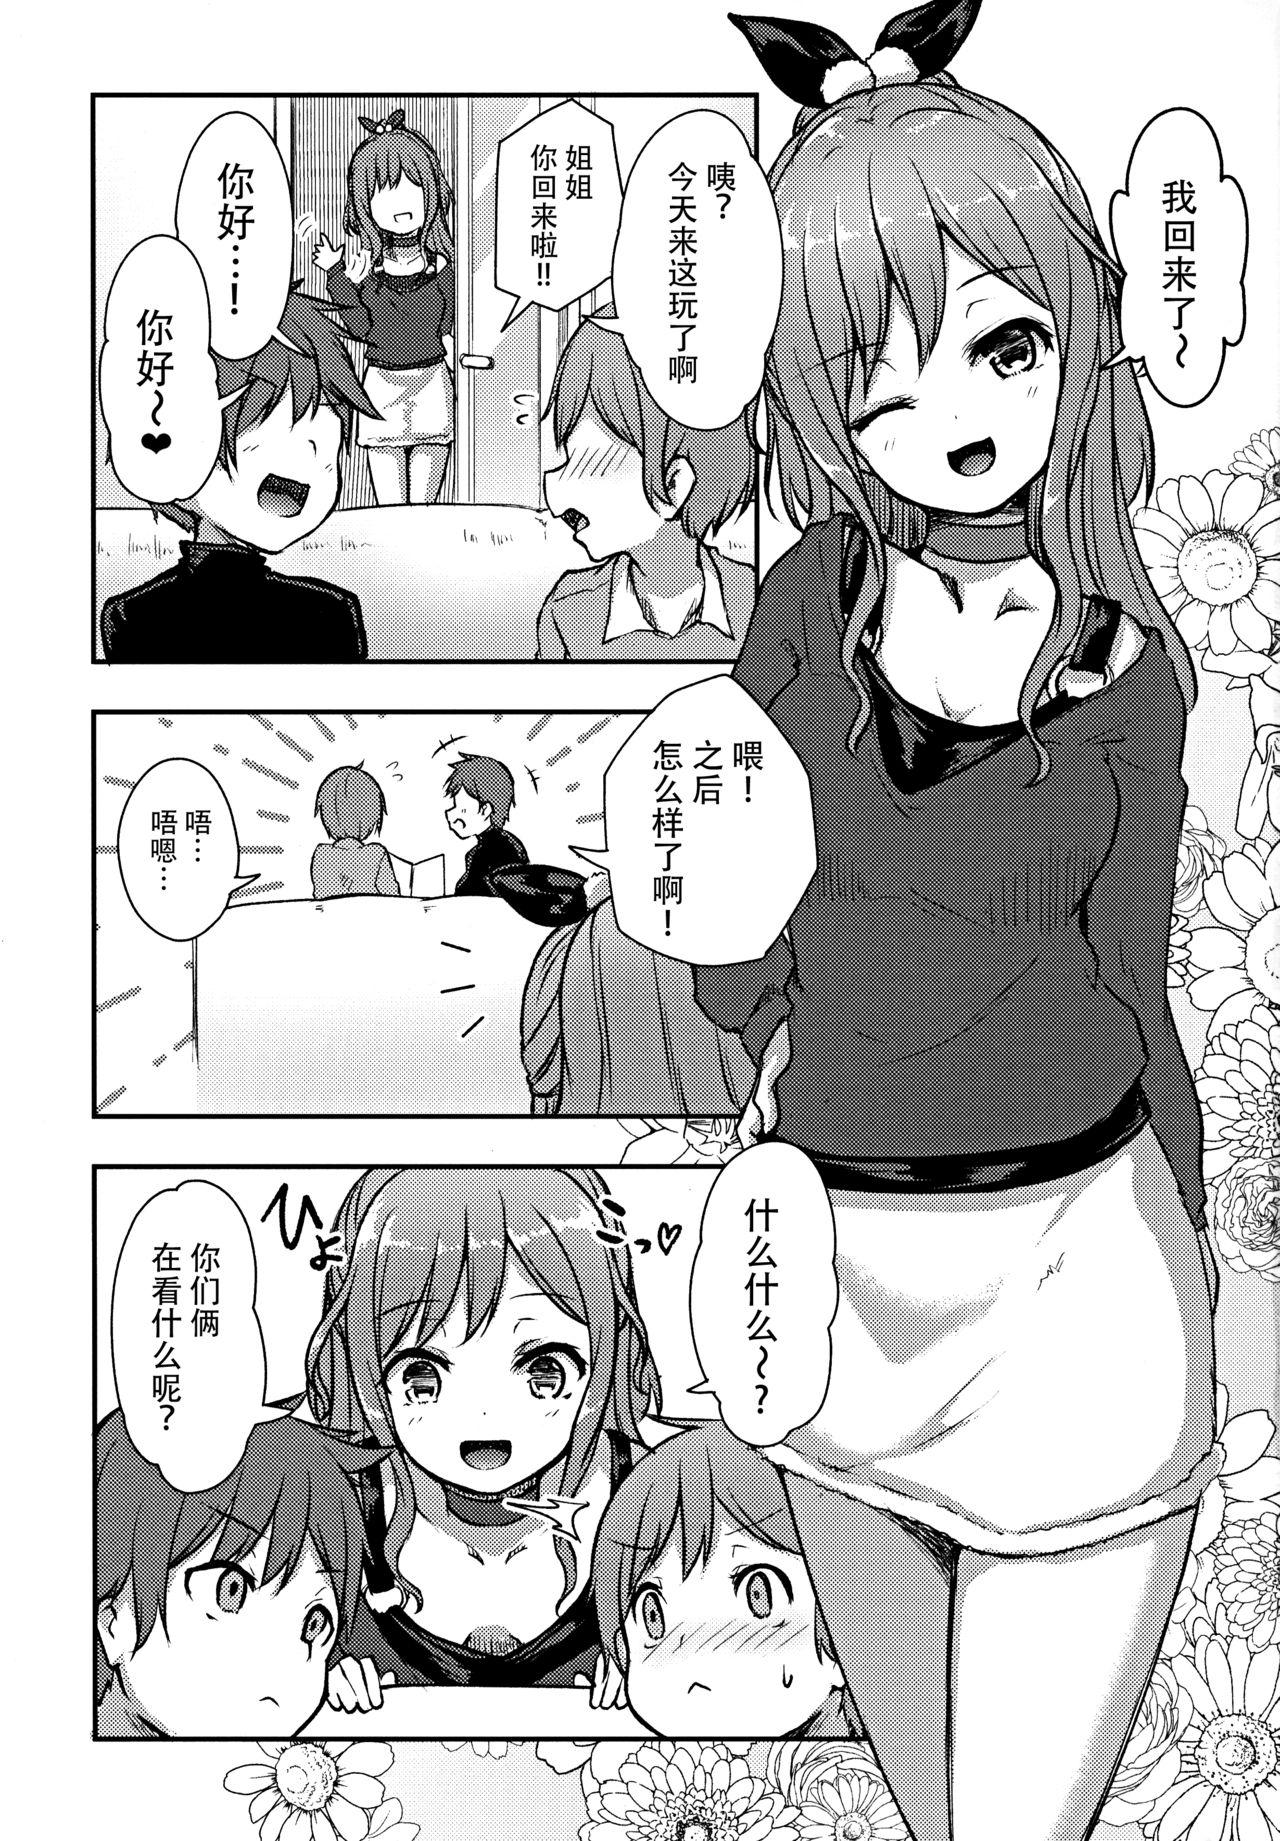 Periscope Hearty Hybrid Household - Bang dream Big Ass - Page 3